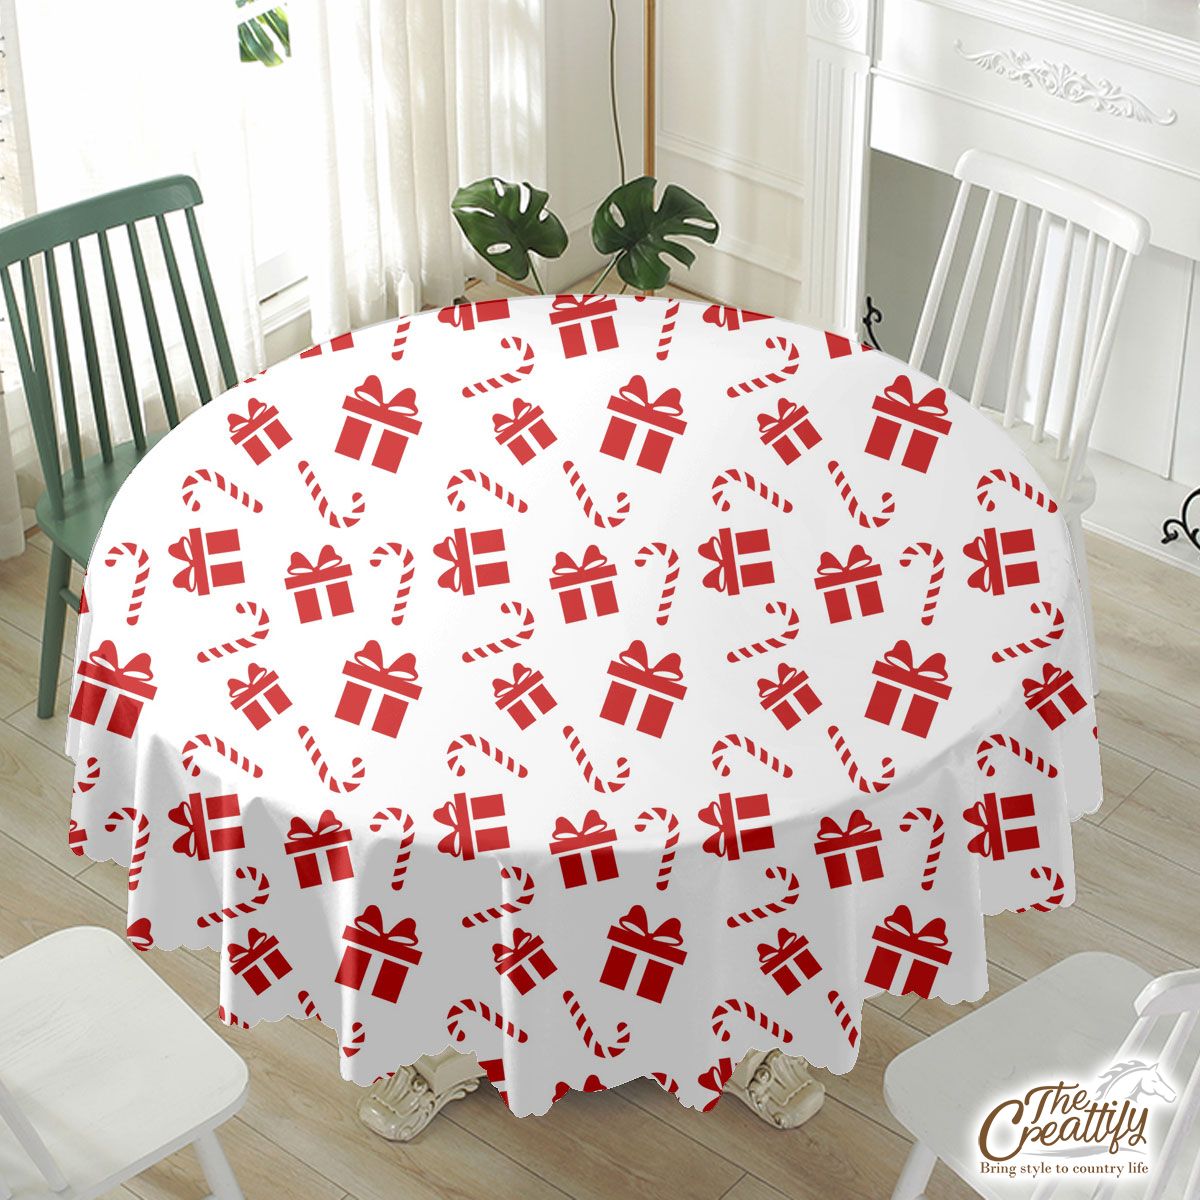 Christmas Gifts And Candy Canes Seamless White Pattern Waterproof Tablecloth